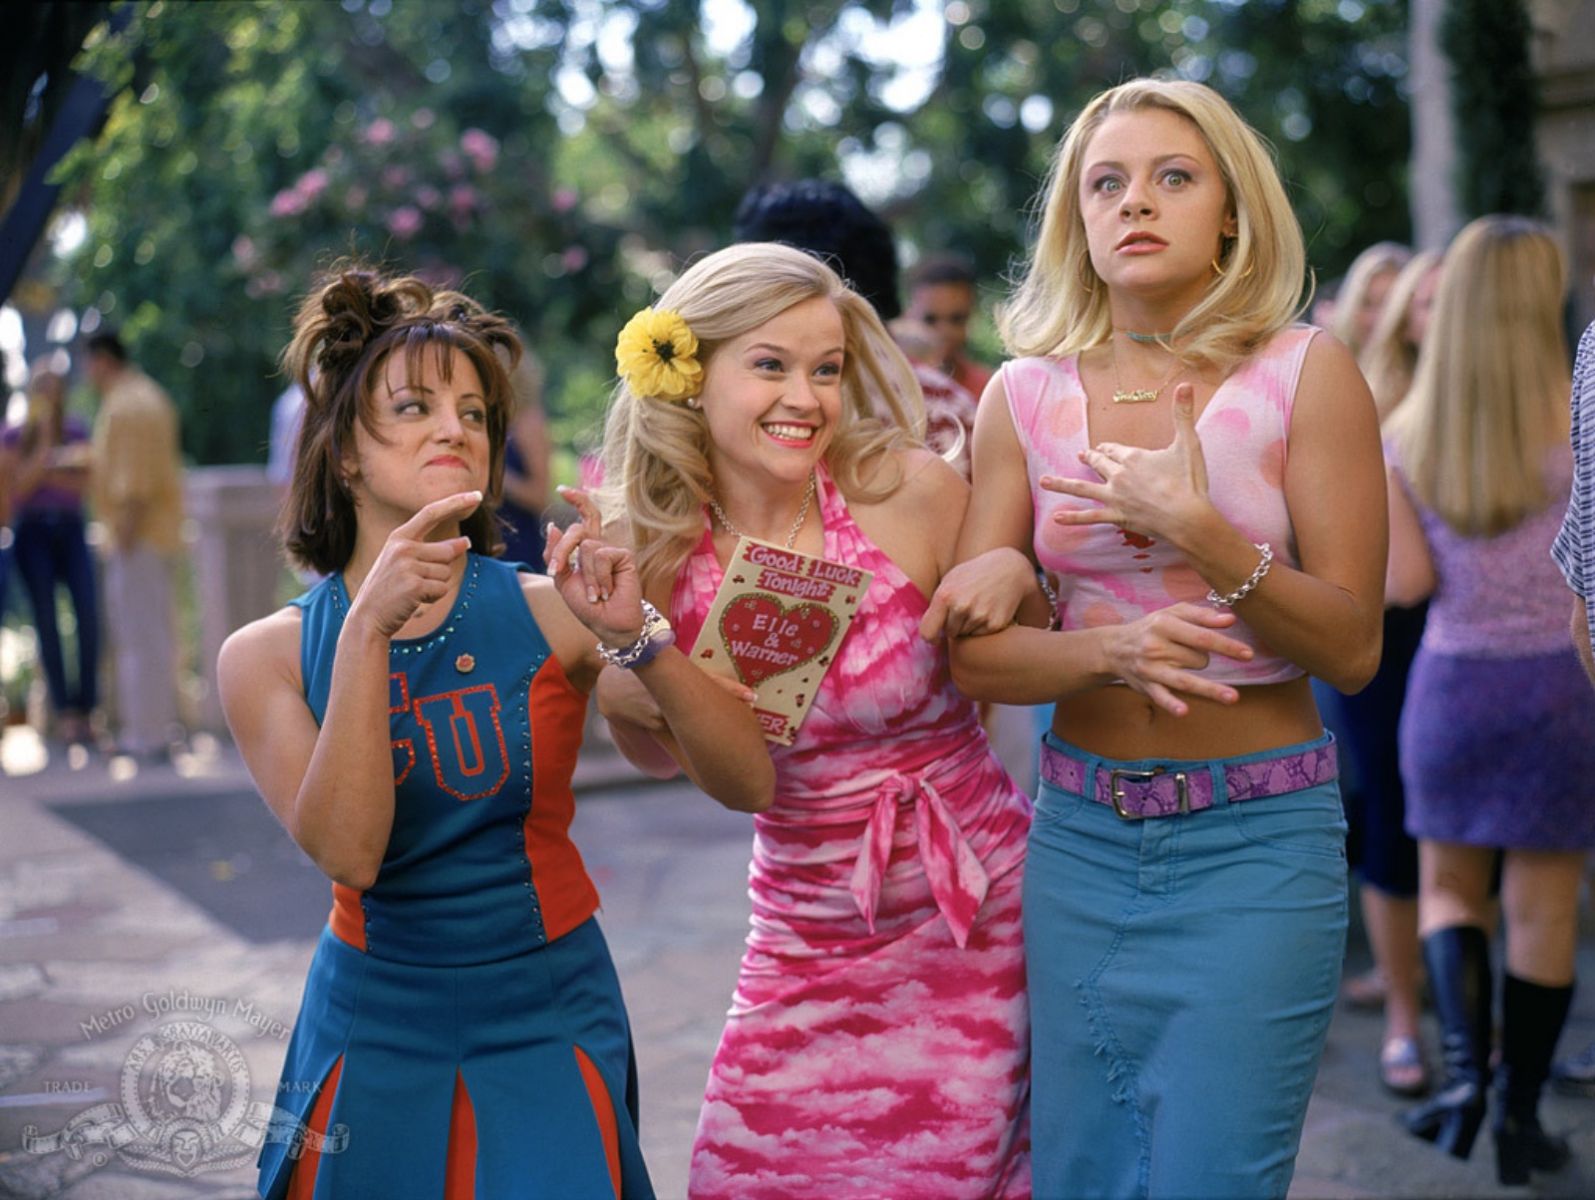 legally blonde, nữ quyền, luật sư, Reese Witherspoon 